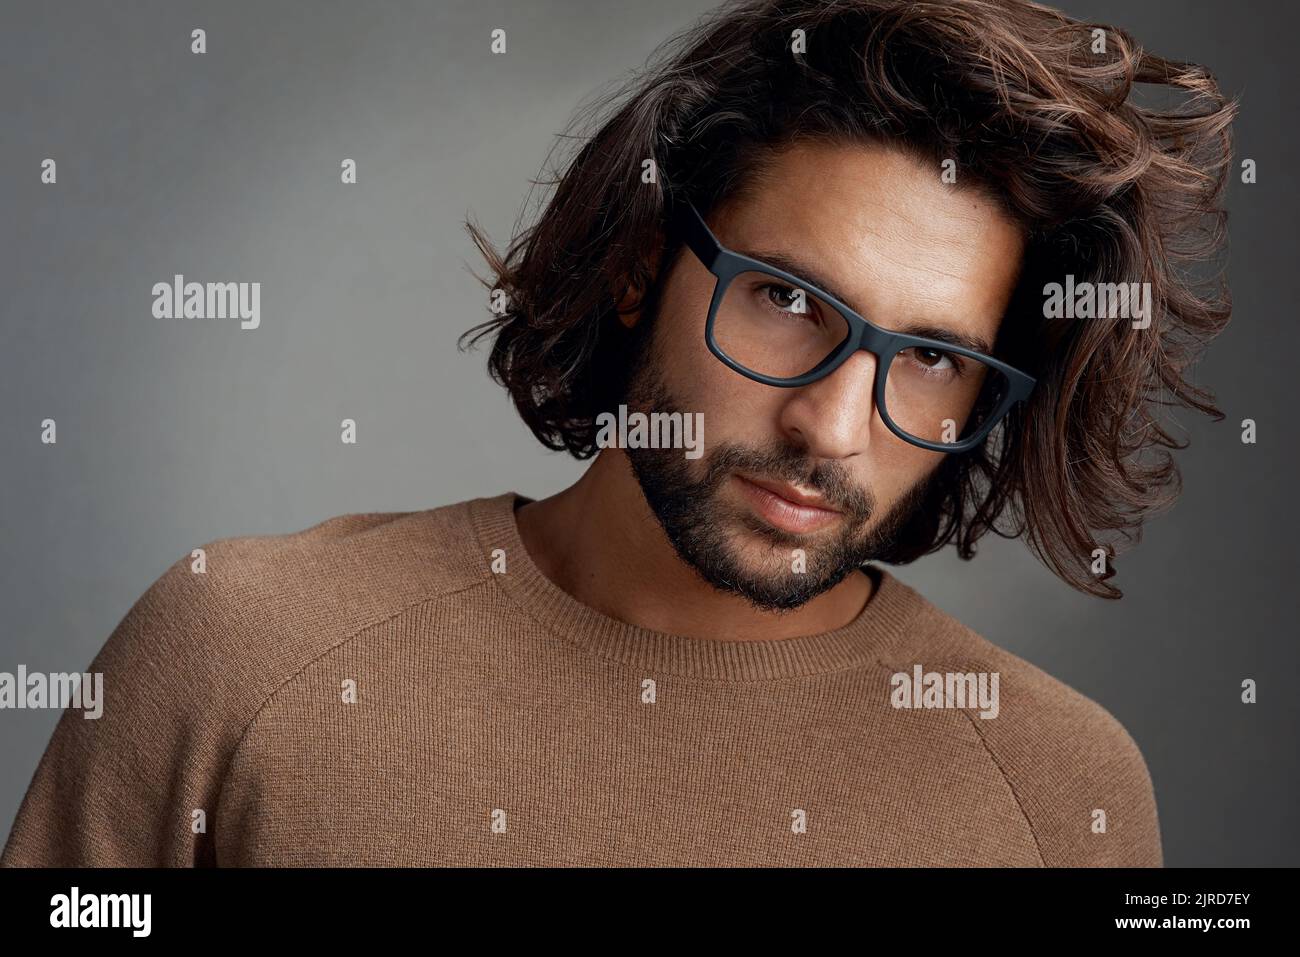 Geek chic. Studio shot of a handsome young man wearing glasses against a gray background. Stock Photo